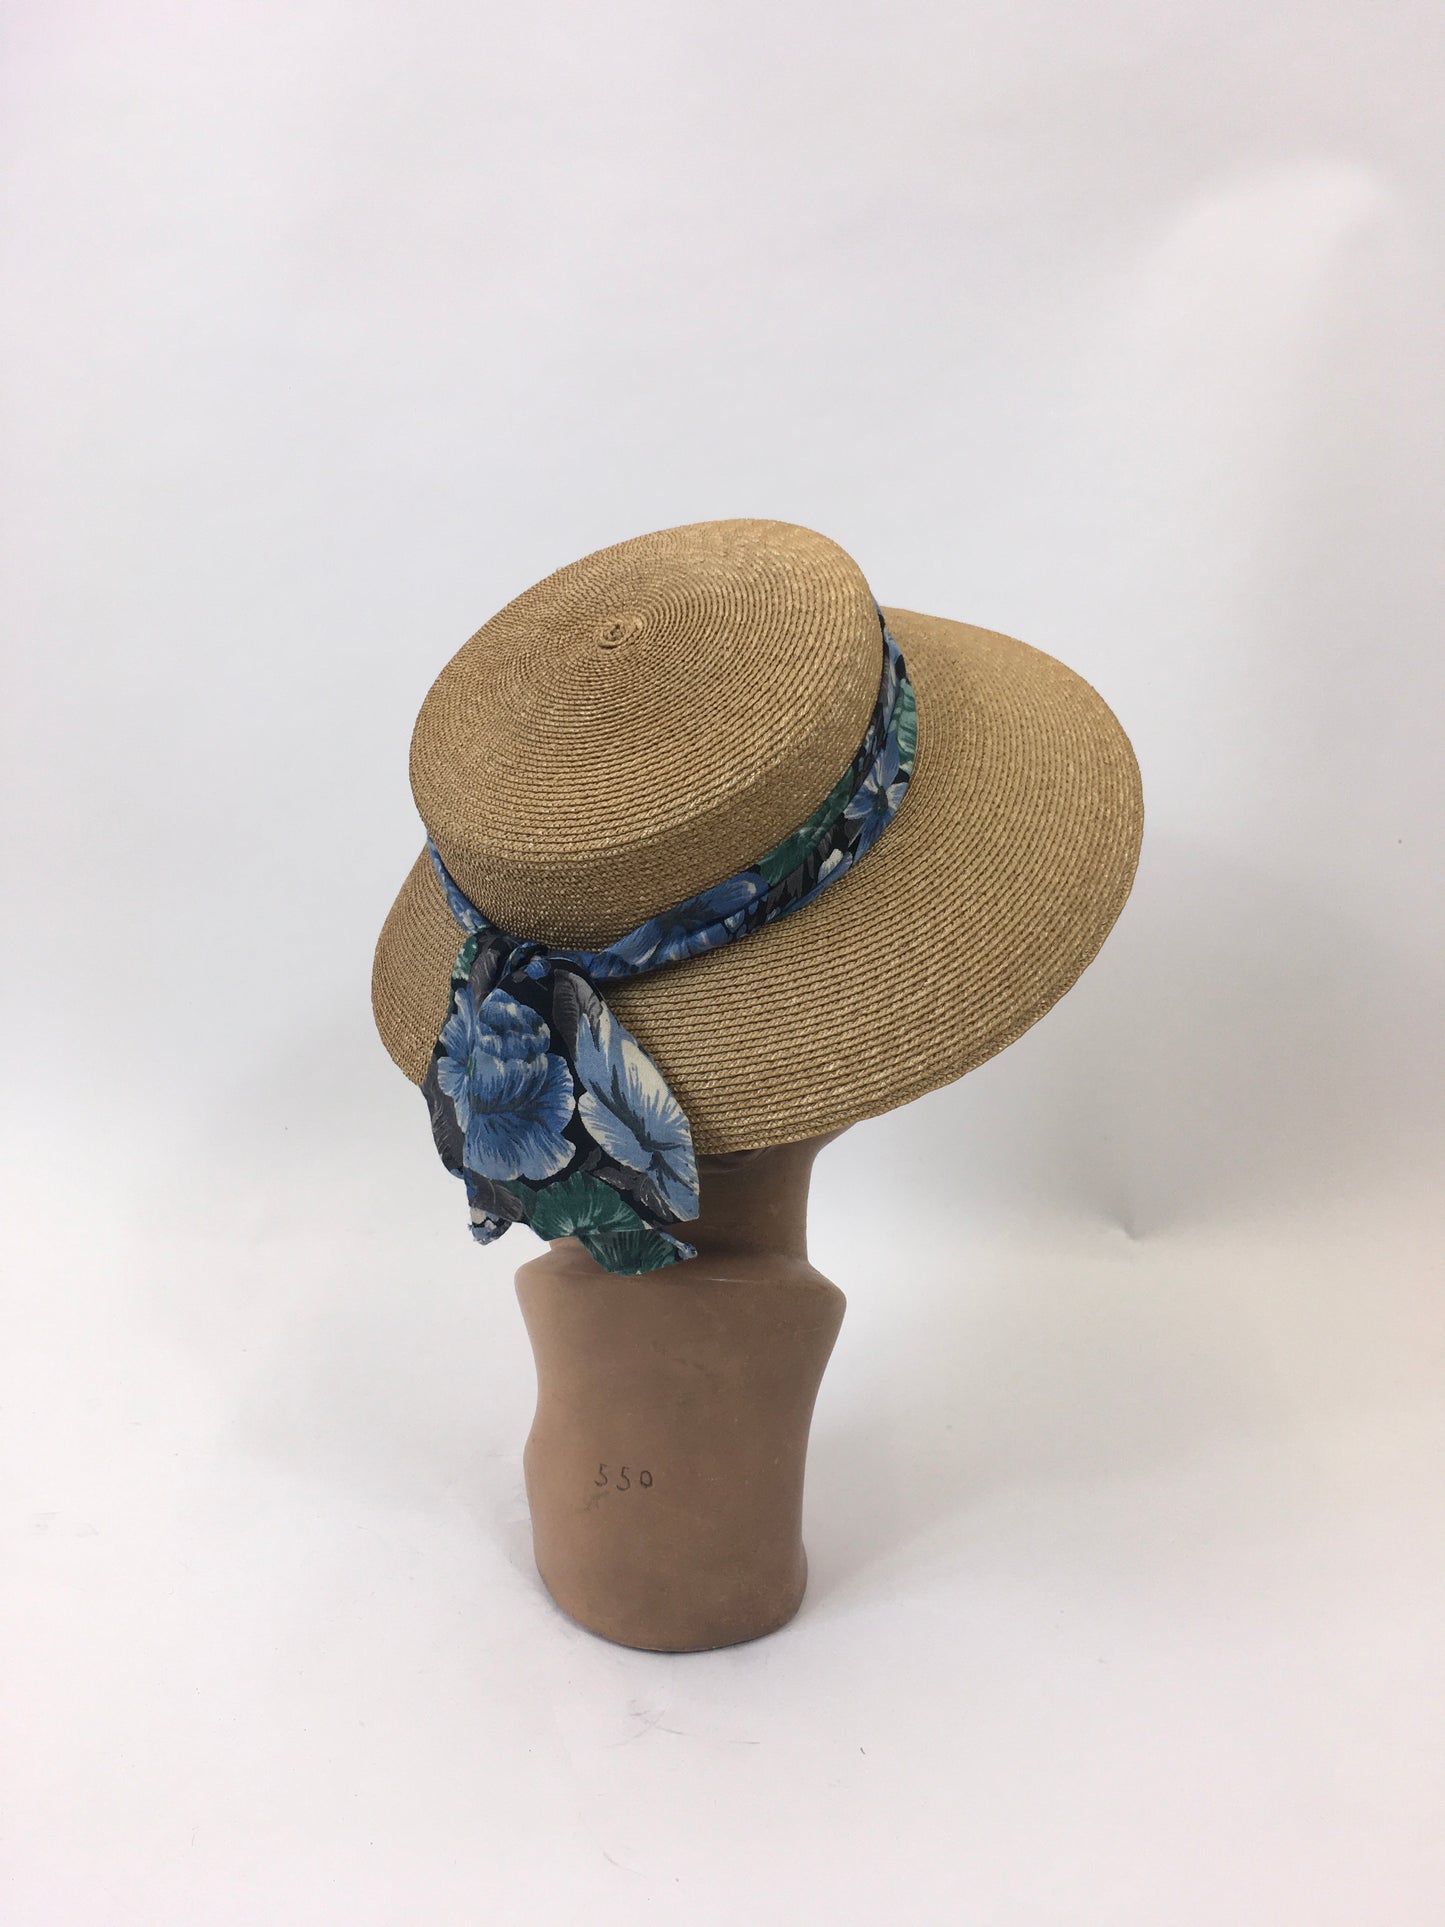 Original 1930’s Gorgeous Natural Straw Hat - Blue floral band